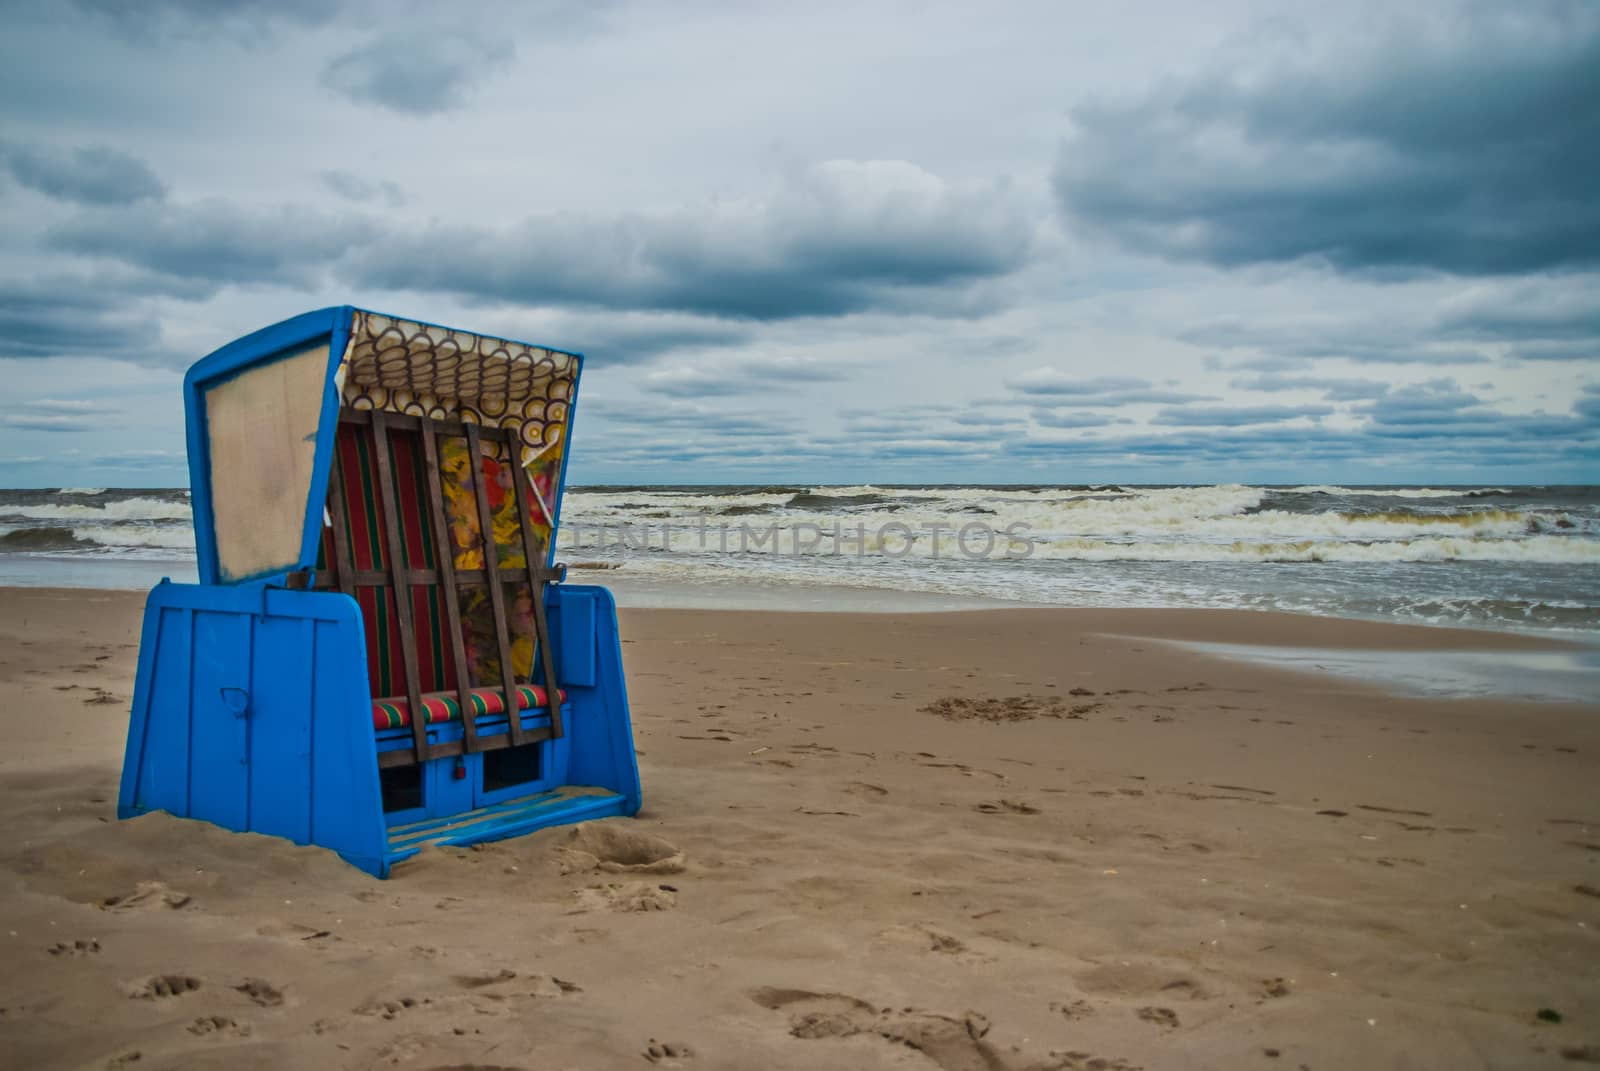 Beach chair at the eastern sea of Germany during summer storm by MXW_Stock